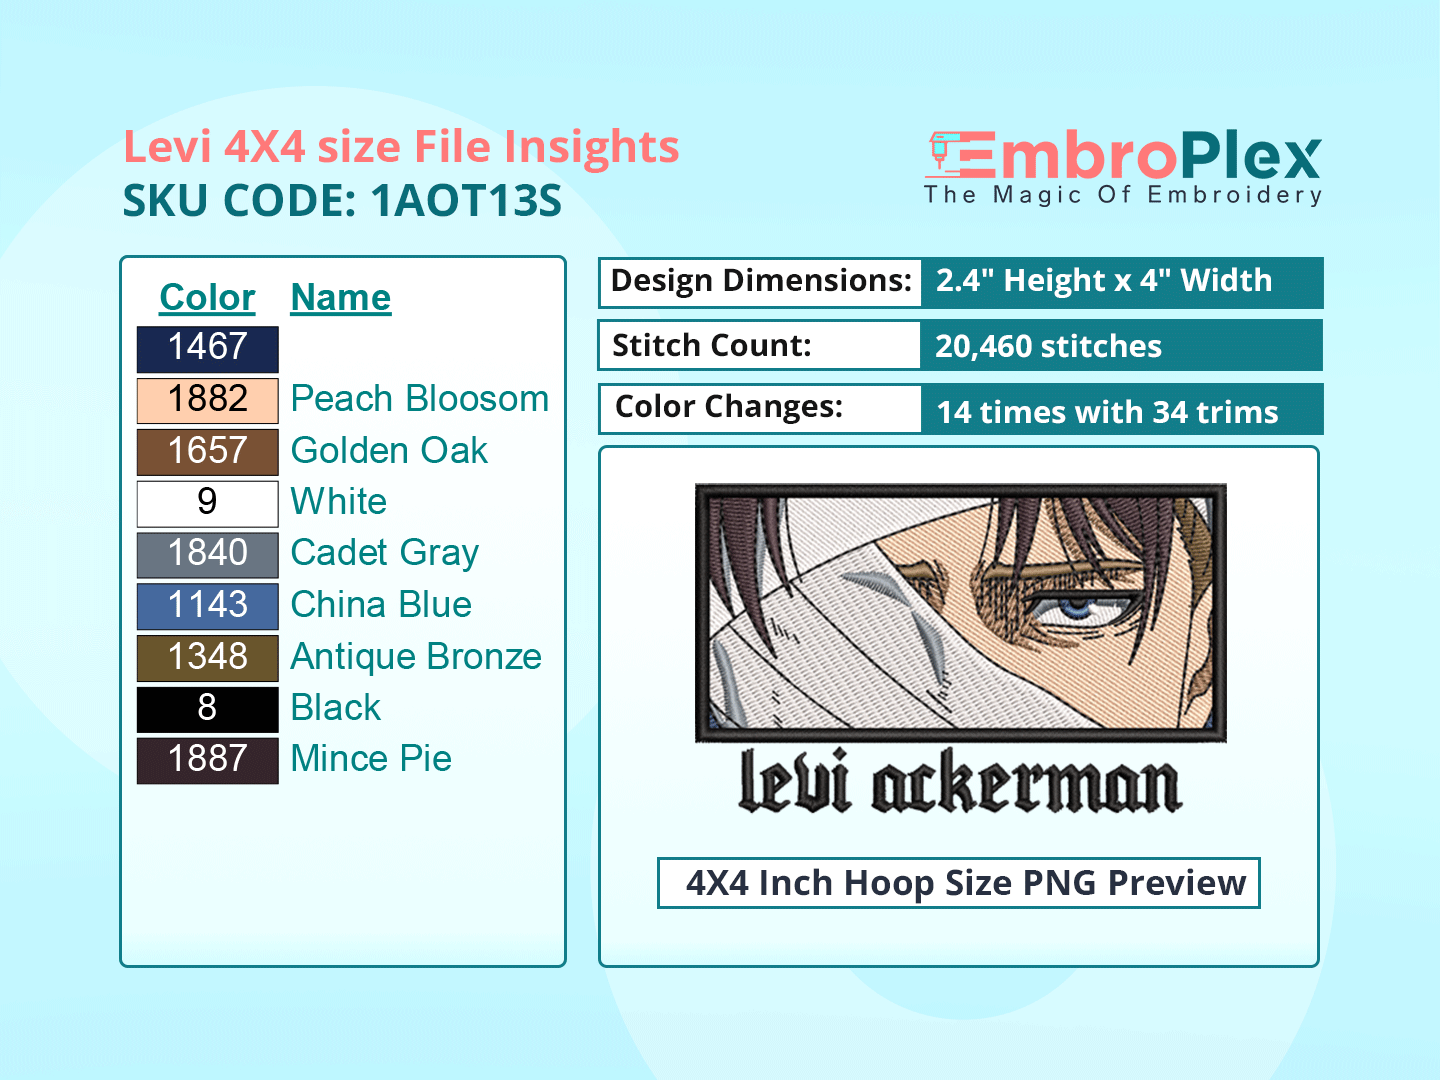 Anime-Inspired Levi Ackerman  Embroidery Design File - 4x4 Inch hoop Size Variation overview image